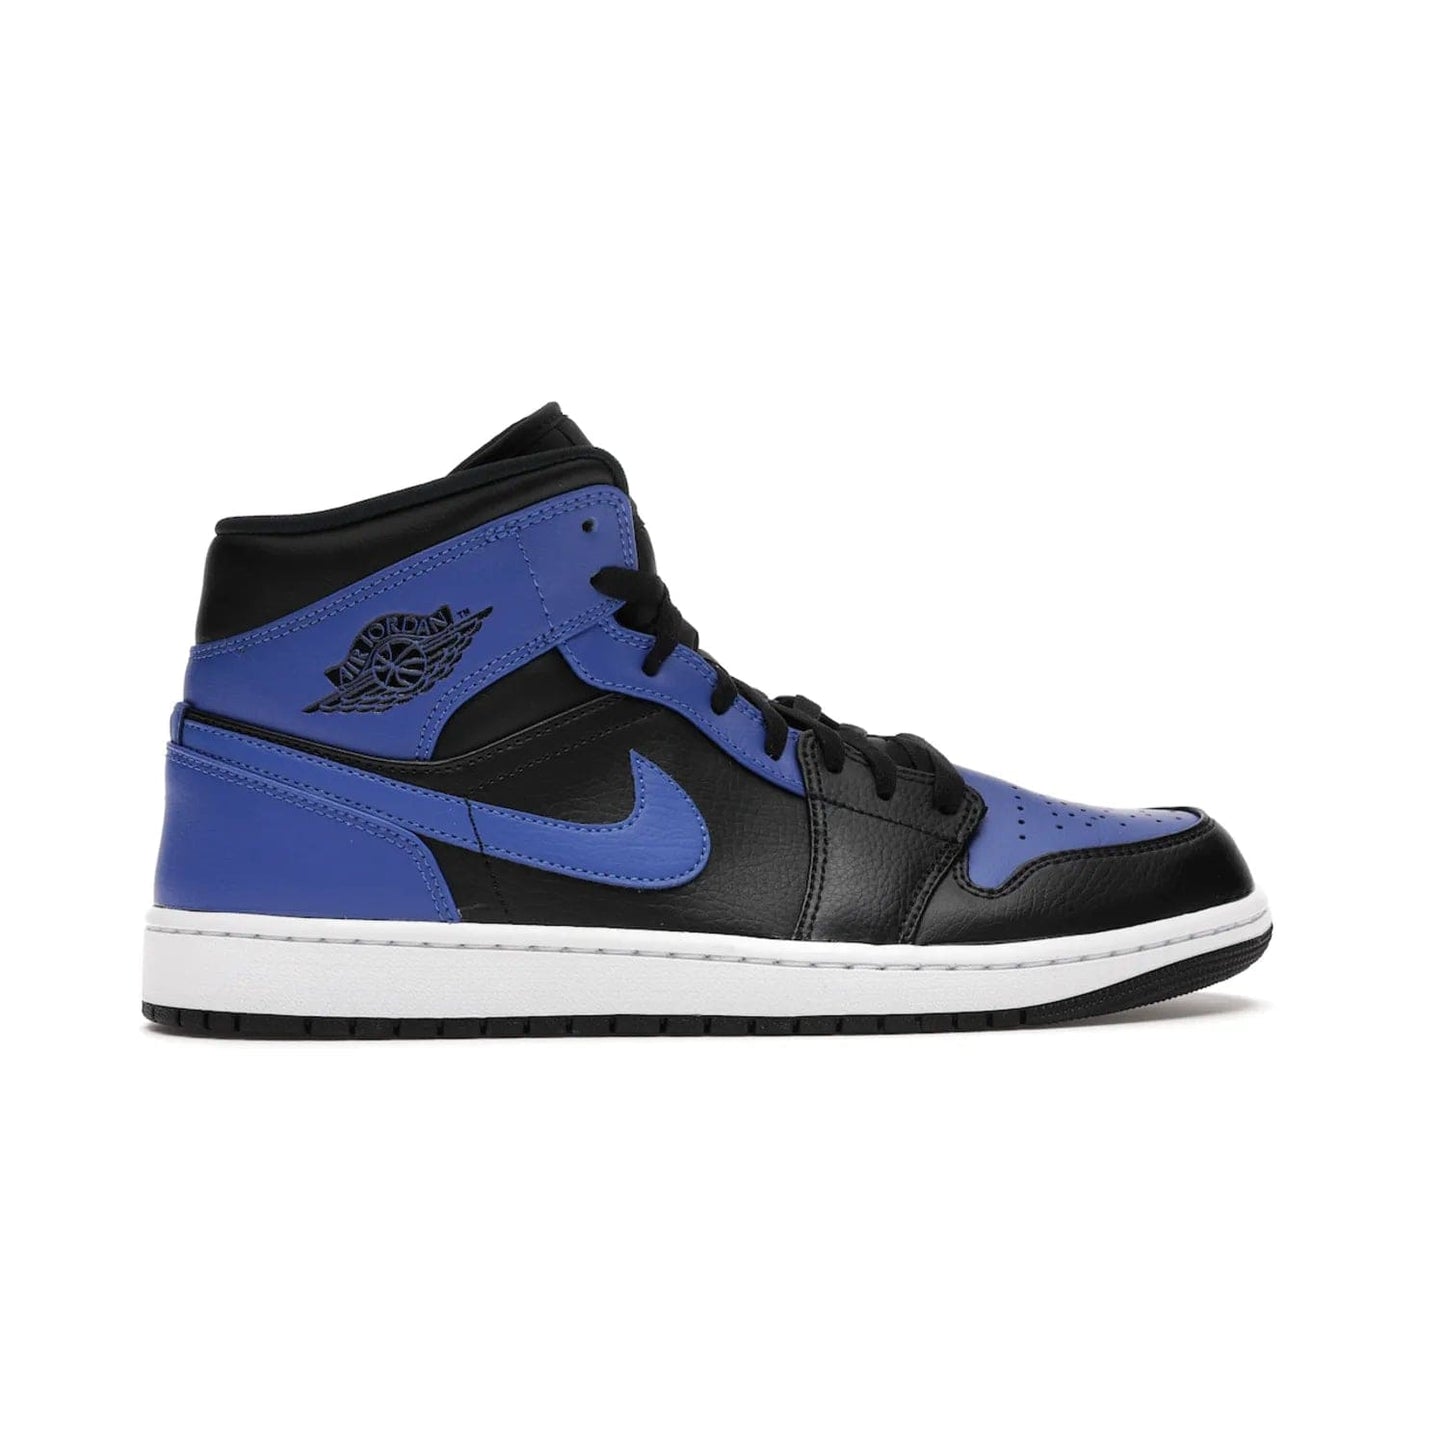 Jordan 1 Mid Hyper Royal Tumbled Leather - Image 36 - Only at www.BallersClubKickz.com - Iconic colorway of the Air Jordan 1 Mid Black Royal Tumbled Leather. Features a black tumbled leather upper, royal blue leather overlays, white midsole & black rubber outsole. Released December 2020. Adds premium style to any collection.